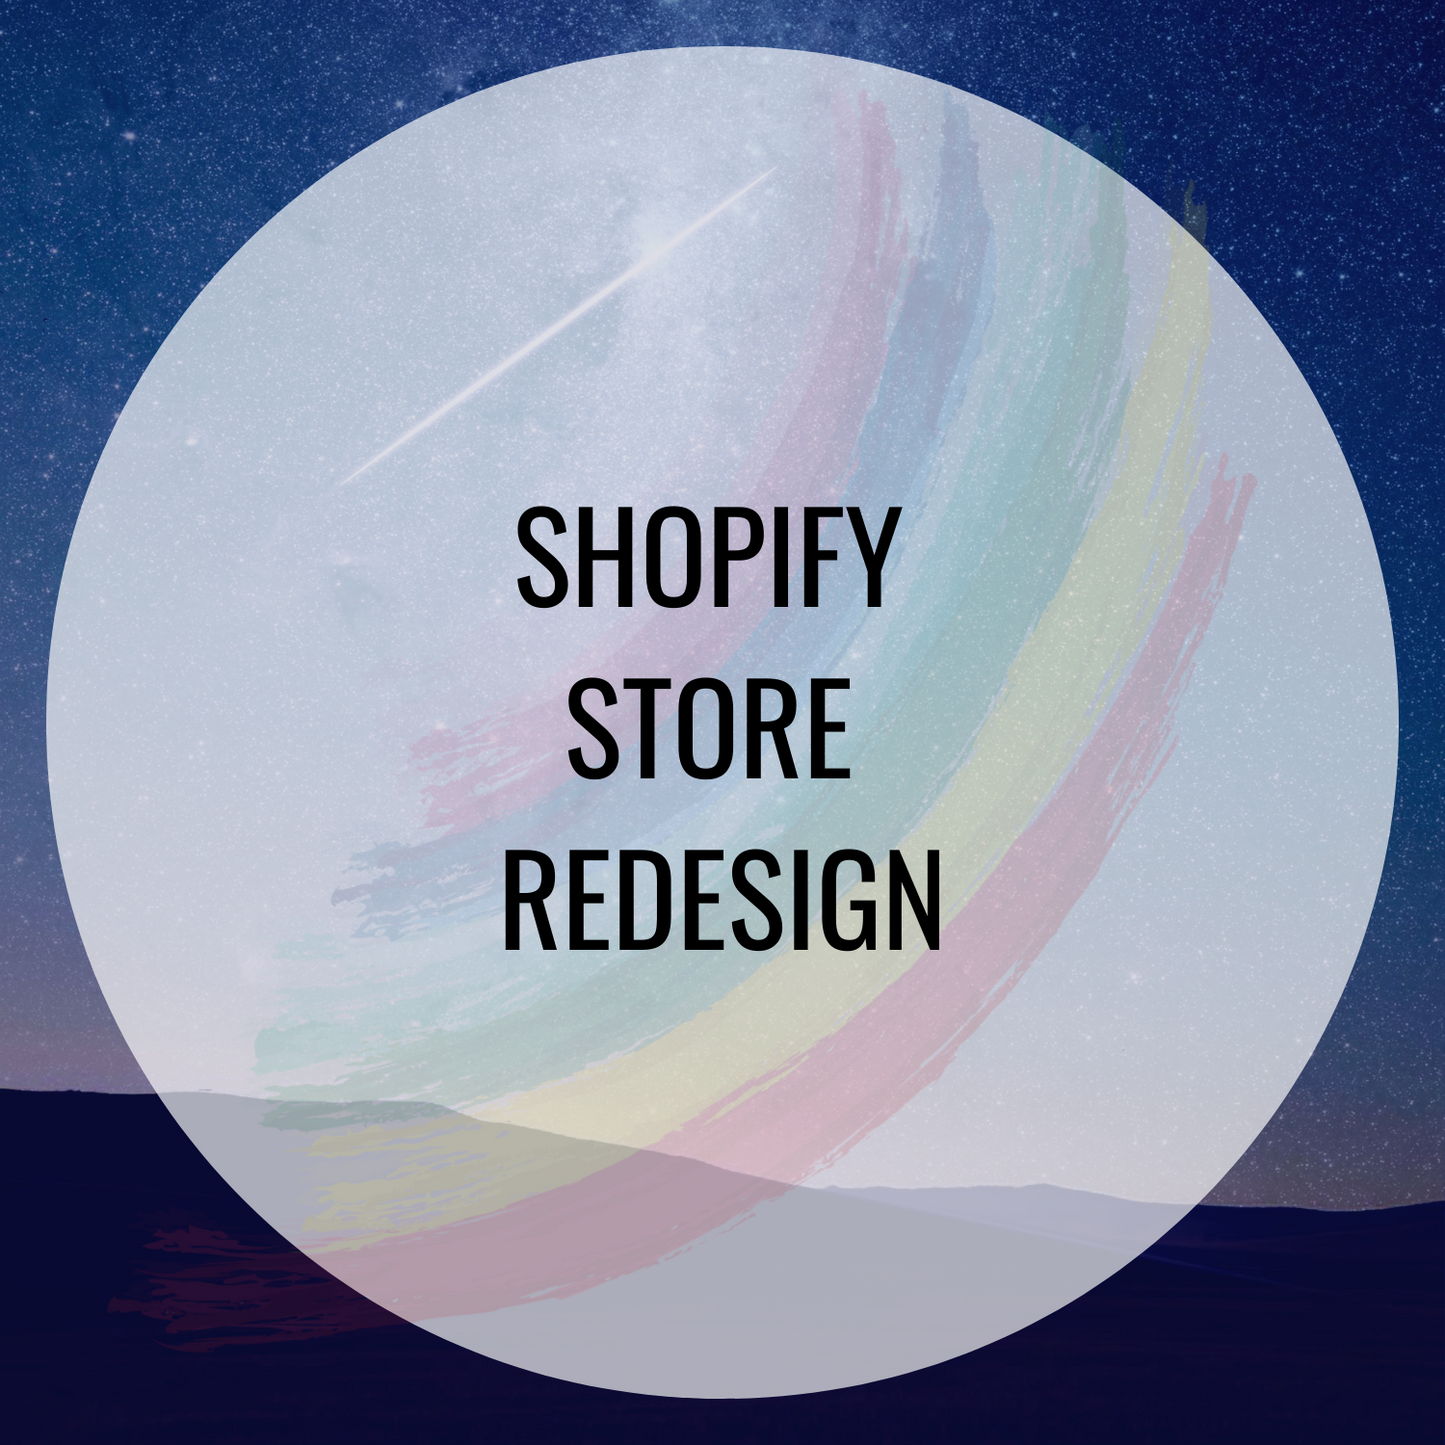 Shopify Store Redesign